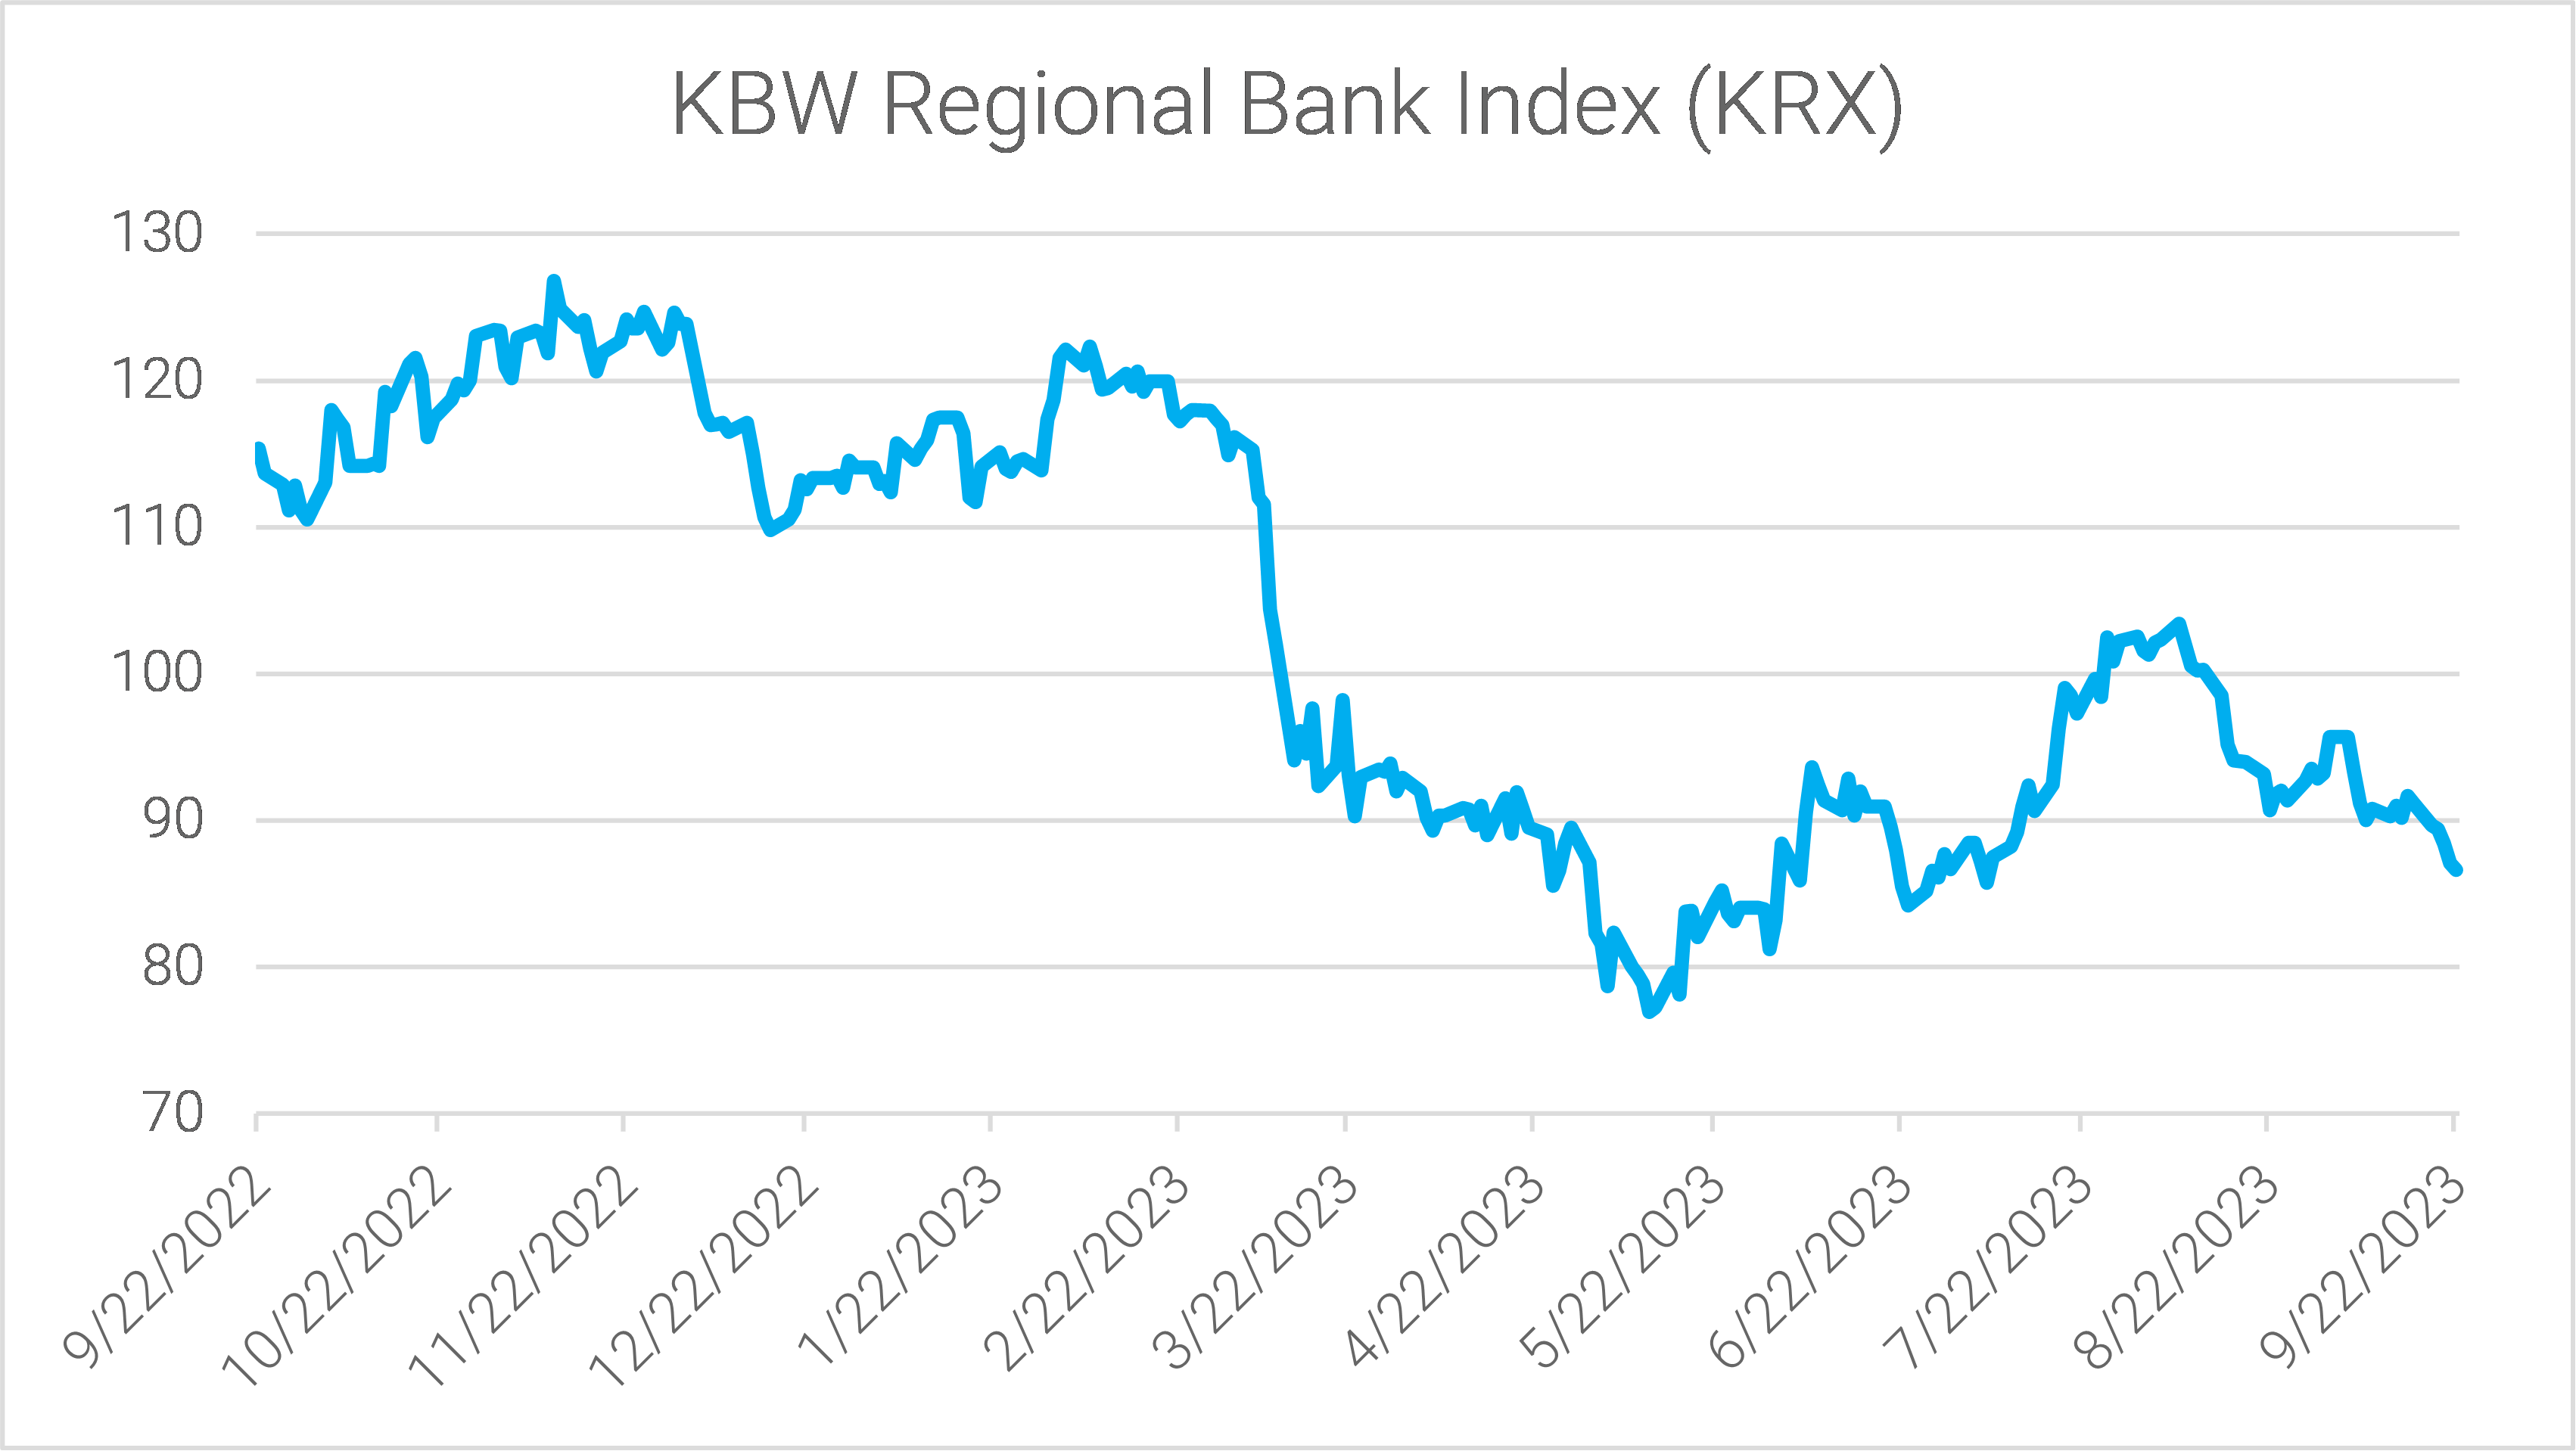 02-the-kbw-regional-bank-index-declined-5-percent-last-week-underperforming-the-s&p-500-by-2.1-percent